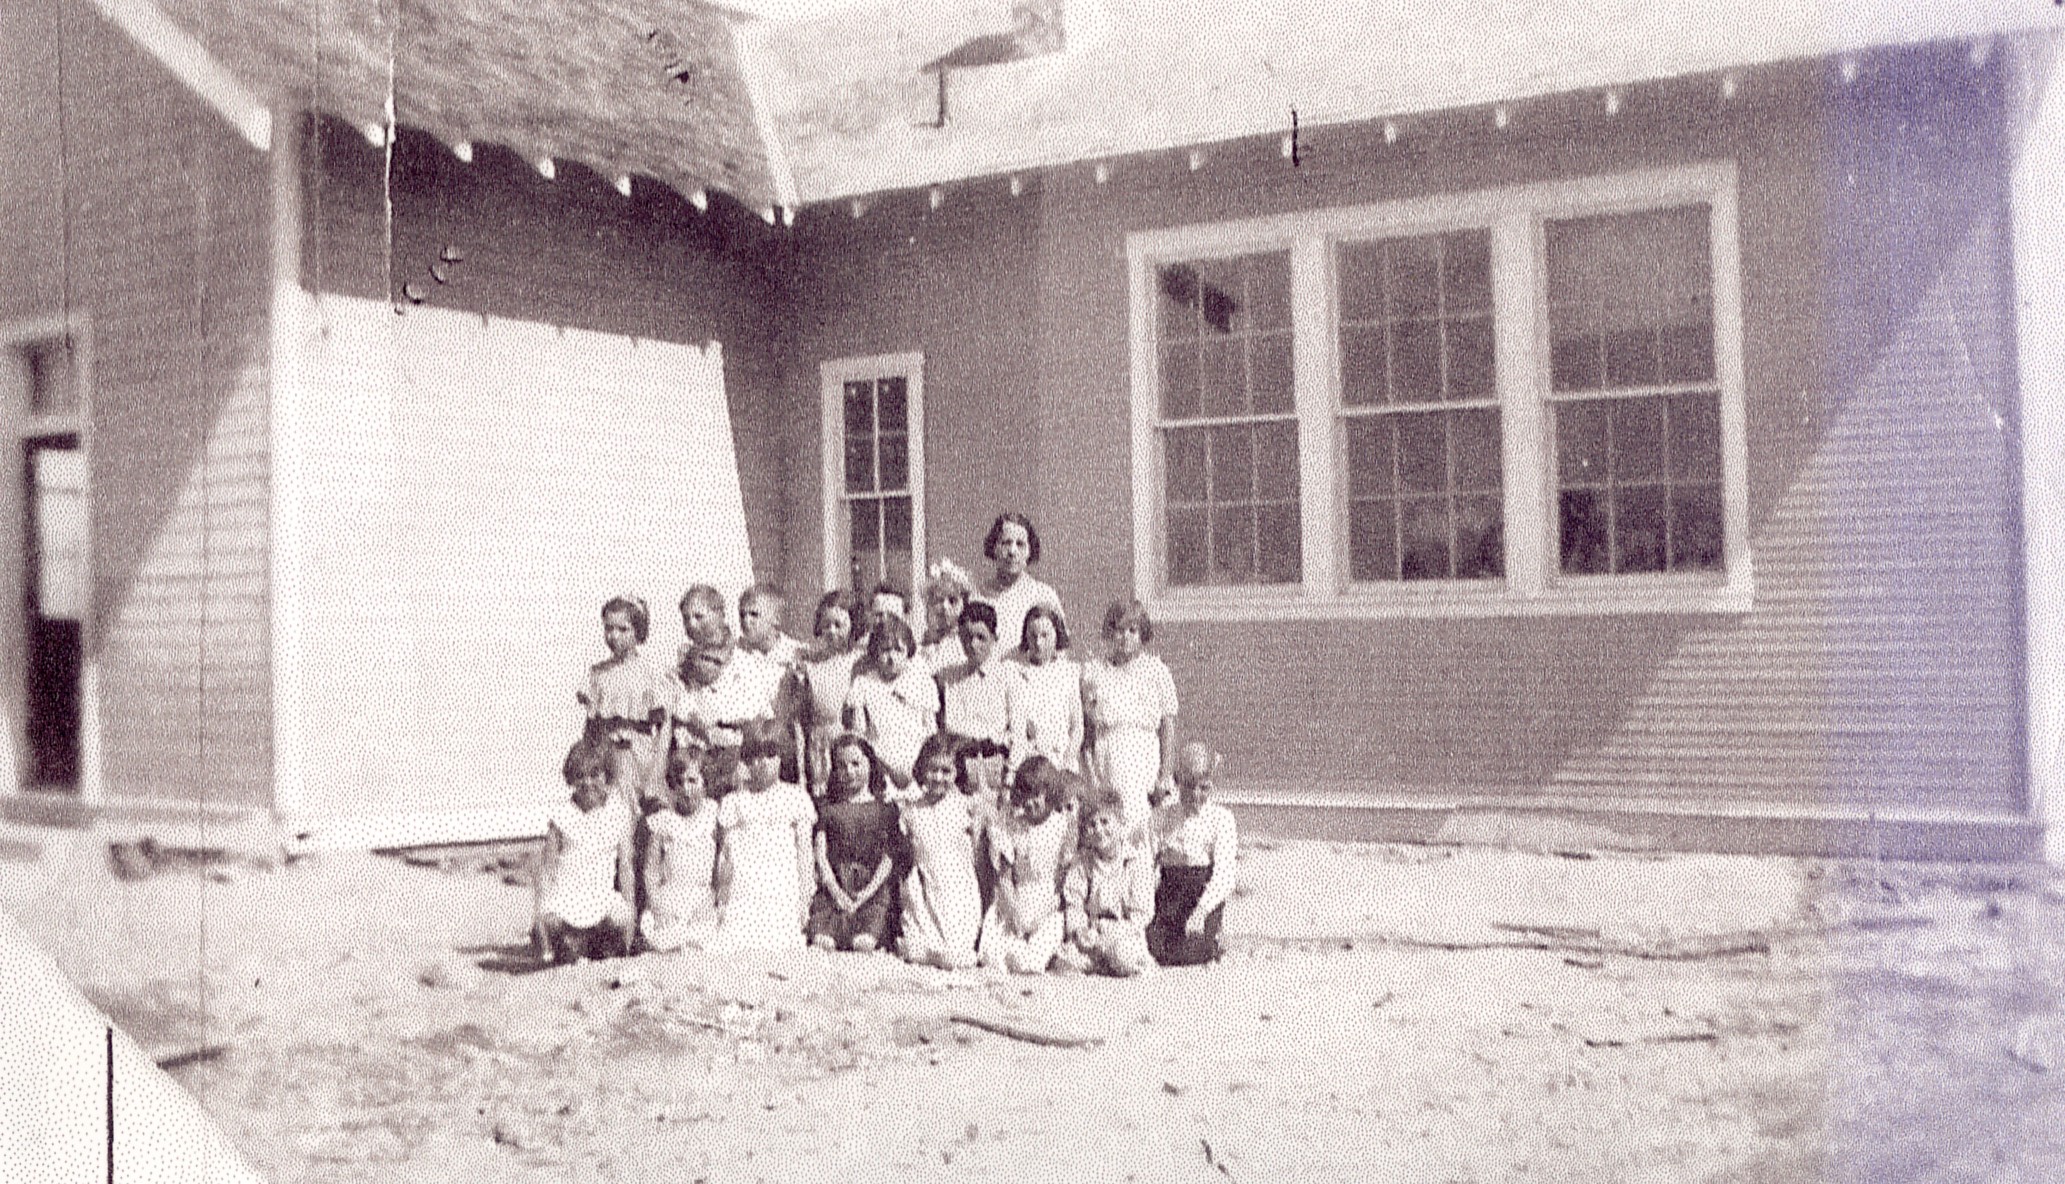 A teacher and students in back of the old Veyo school & church